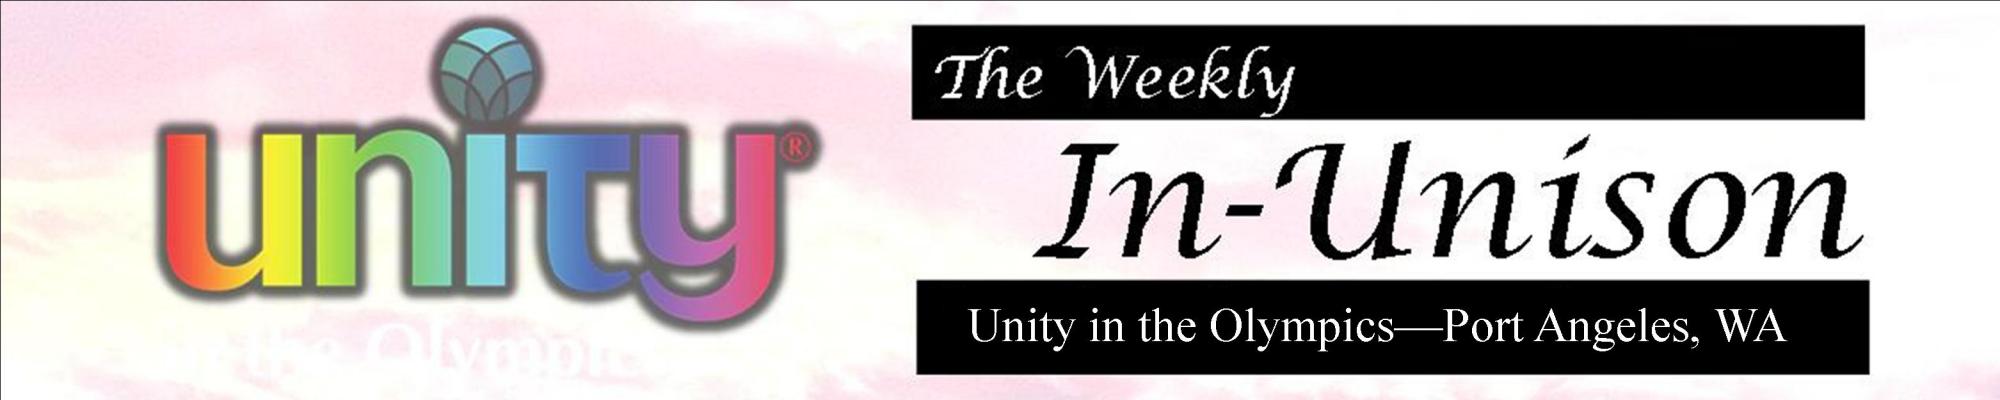 The Weekly IN-UNISON May 8, 2024 Edition